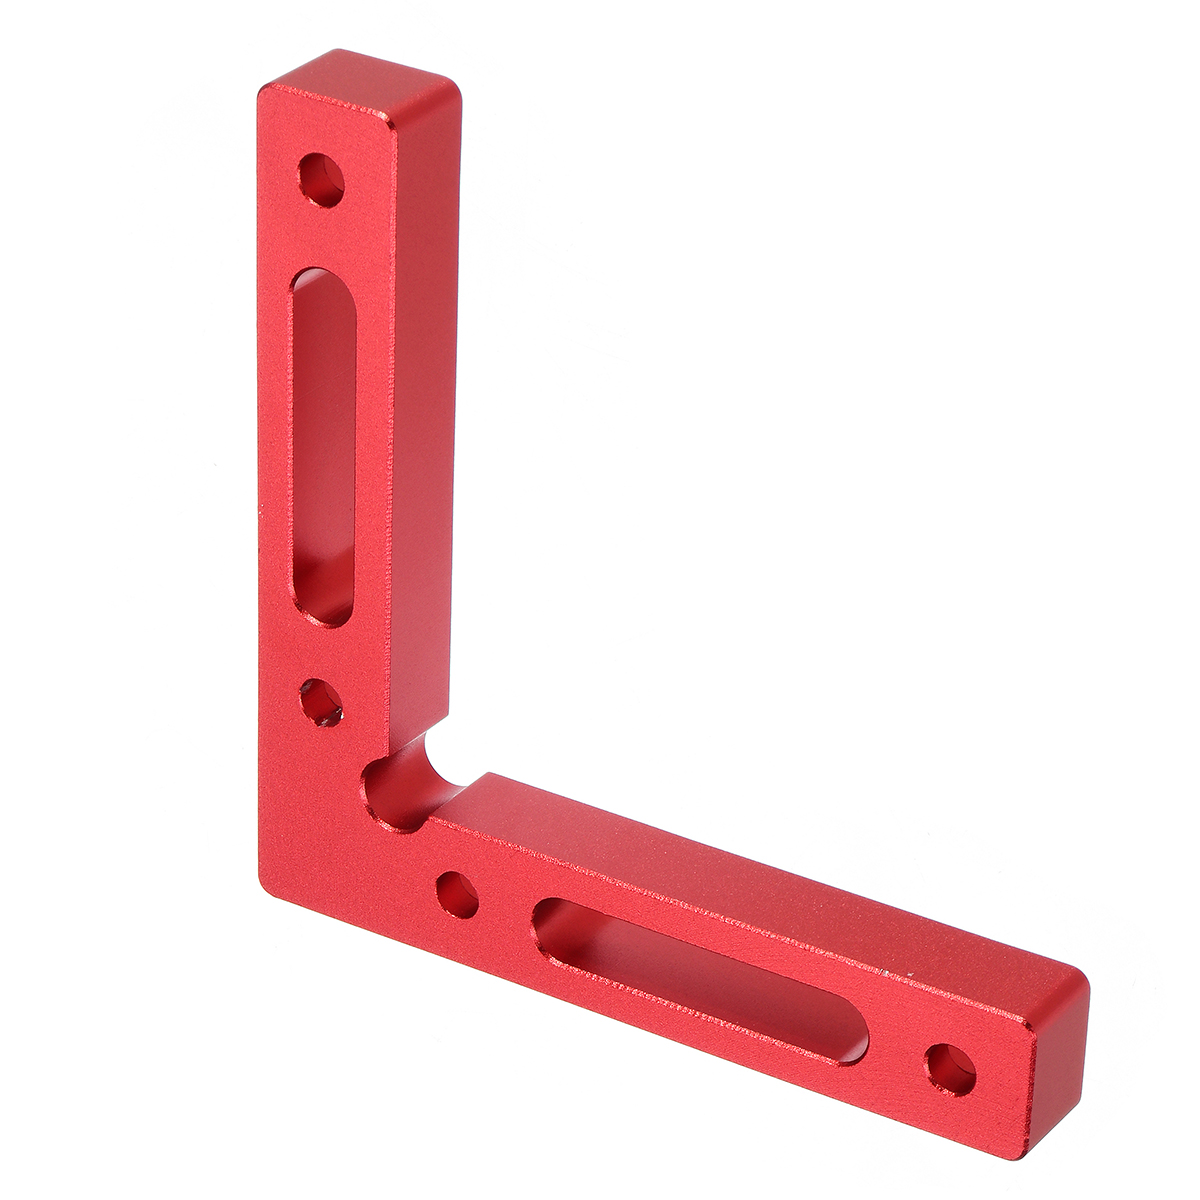 L-Shape-Clamp-90-Degree-Square-Right-Angle-Corner-Wood-Metal-Welding-Multifunctional-Tools-1543730-3